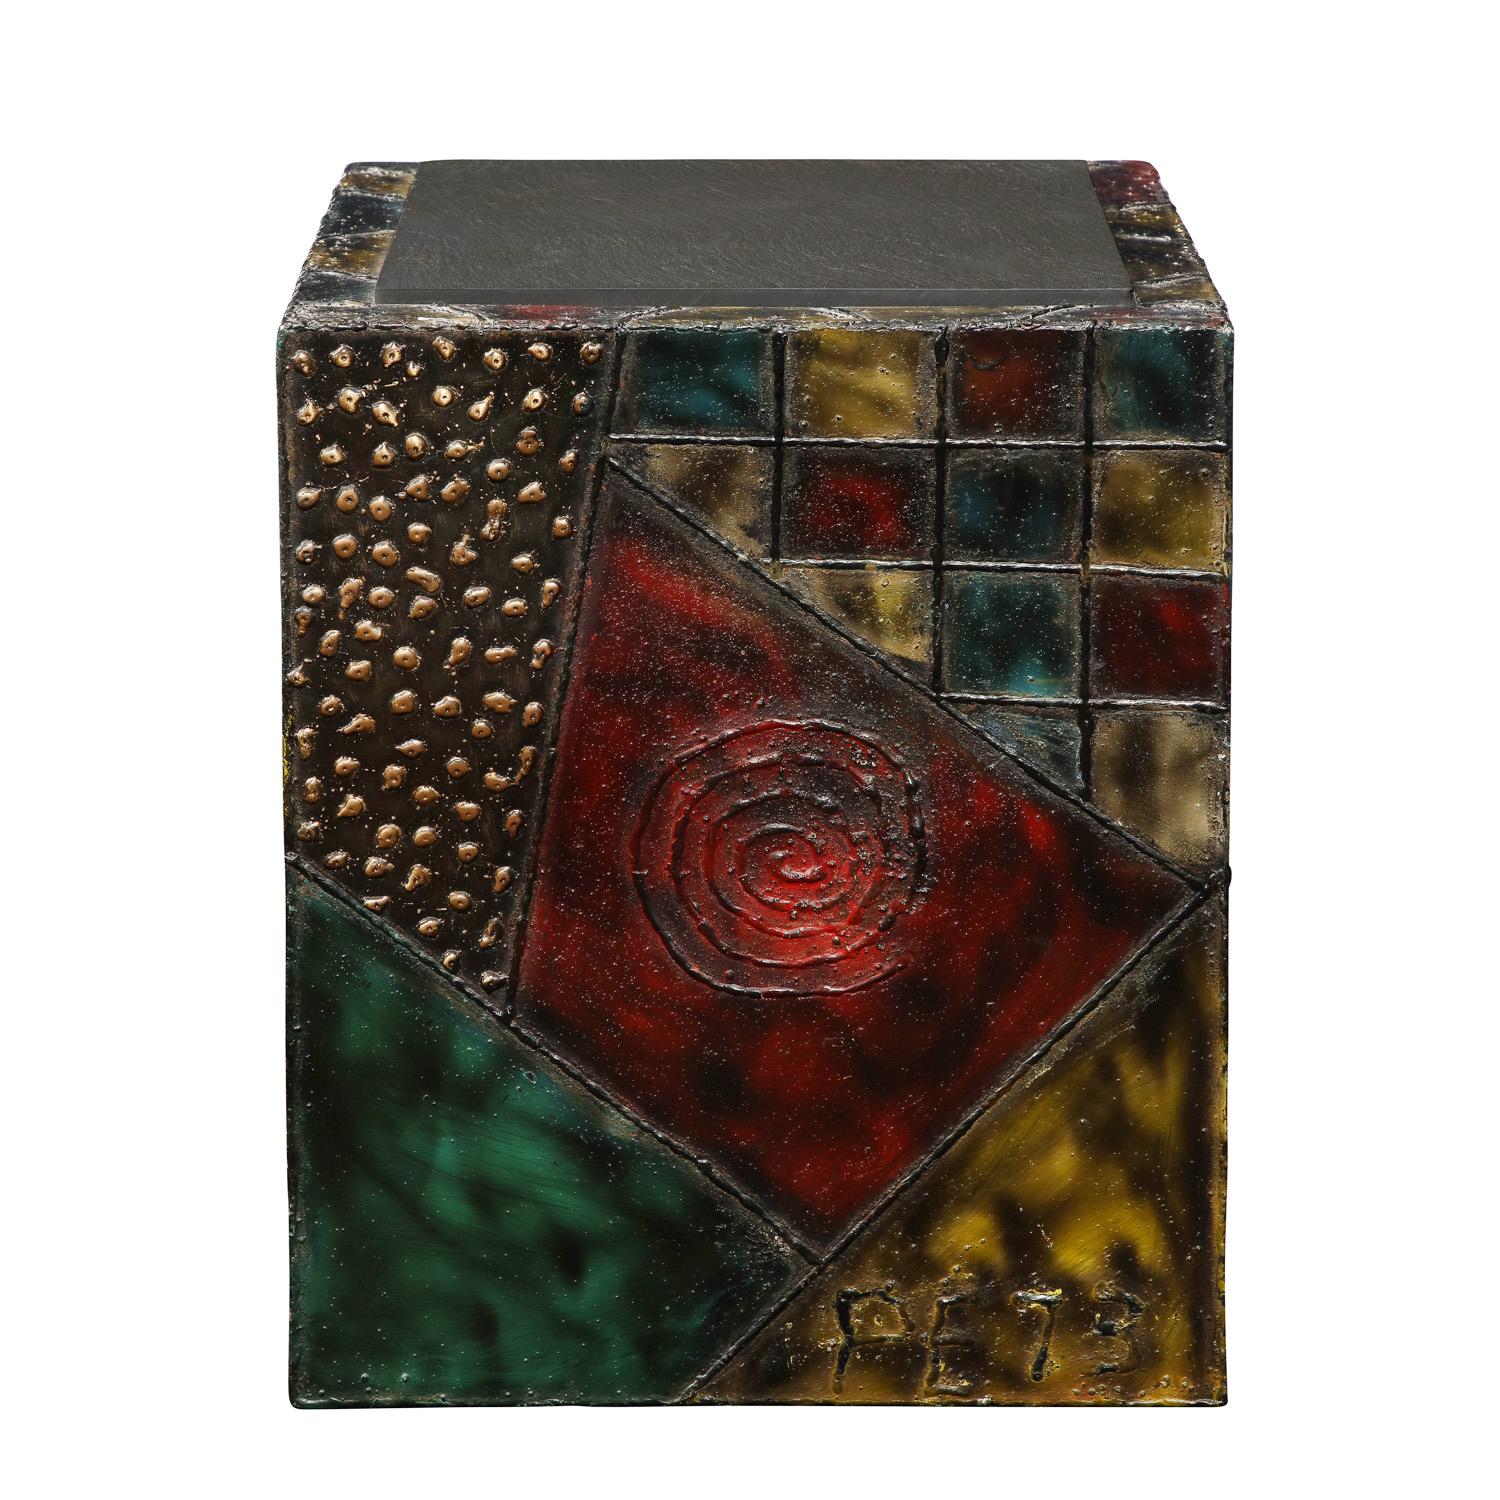 American Paul Evans Hand-Welded Cube Table with Polychrome Enamels 1973 'Signed'